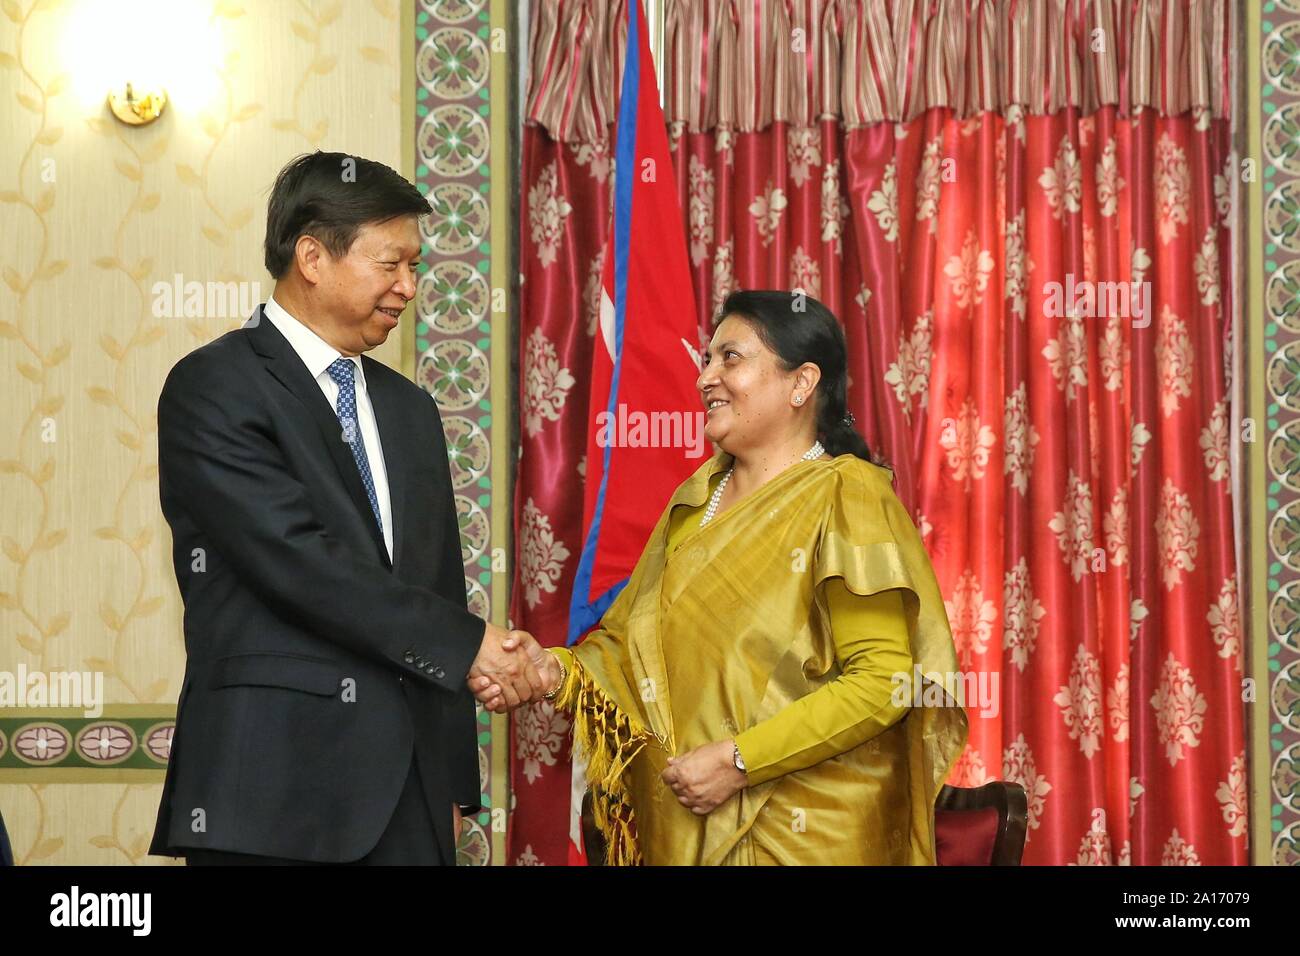 Kathmandu, Nepal. 24th Sep, 2019. Nepalese President Bidhya Devi Bhandari shakes hands with Song Tao, head of the International Department of the Communist Party of China (CPC) Central Committee, in Kathmandu, Nepal, on Sept. 24, 2019. Credit: Sulav Shrestha/Xinhua Stock Photo